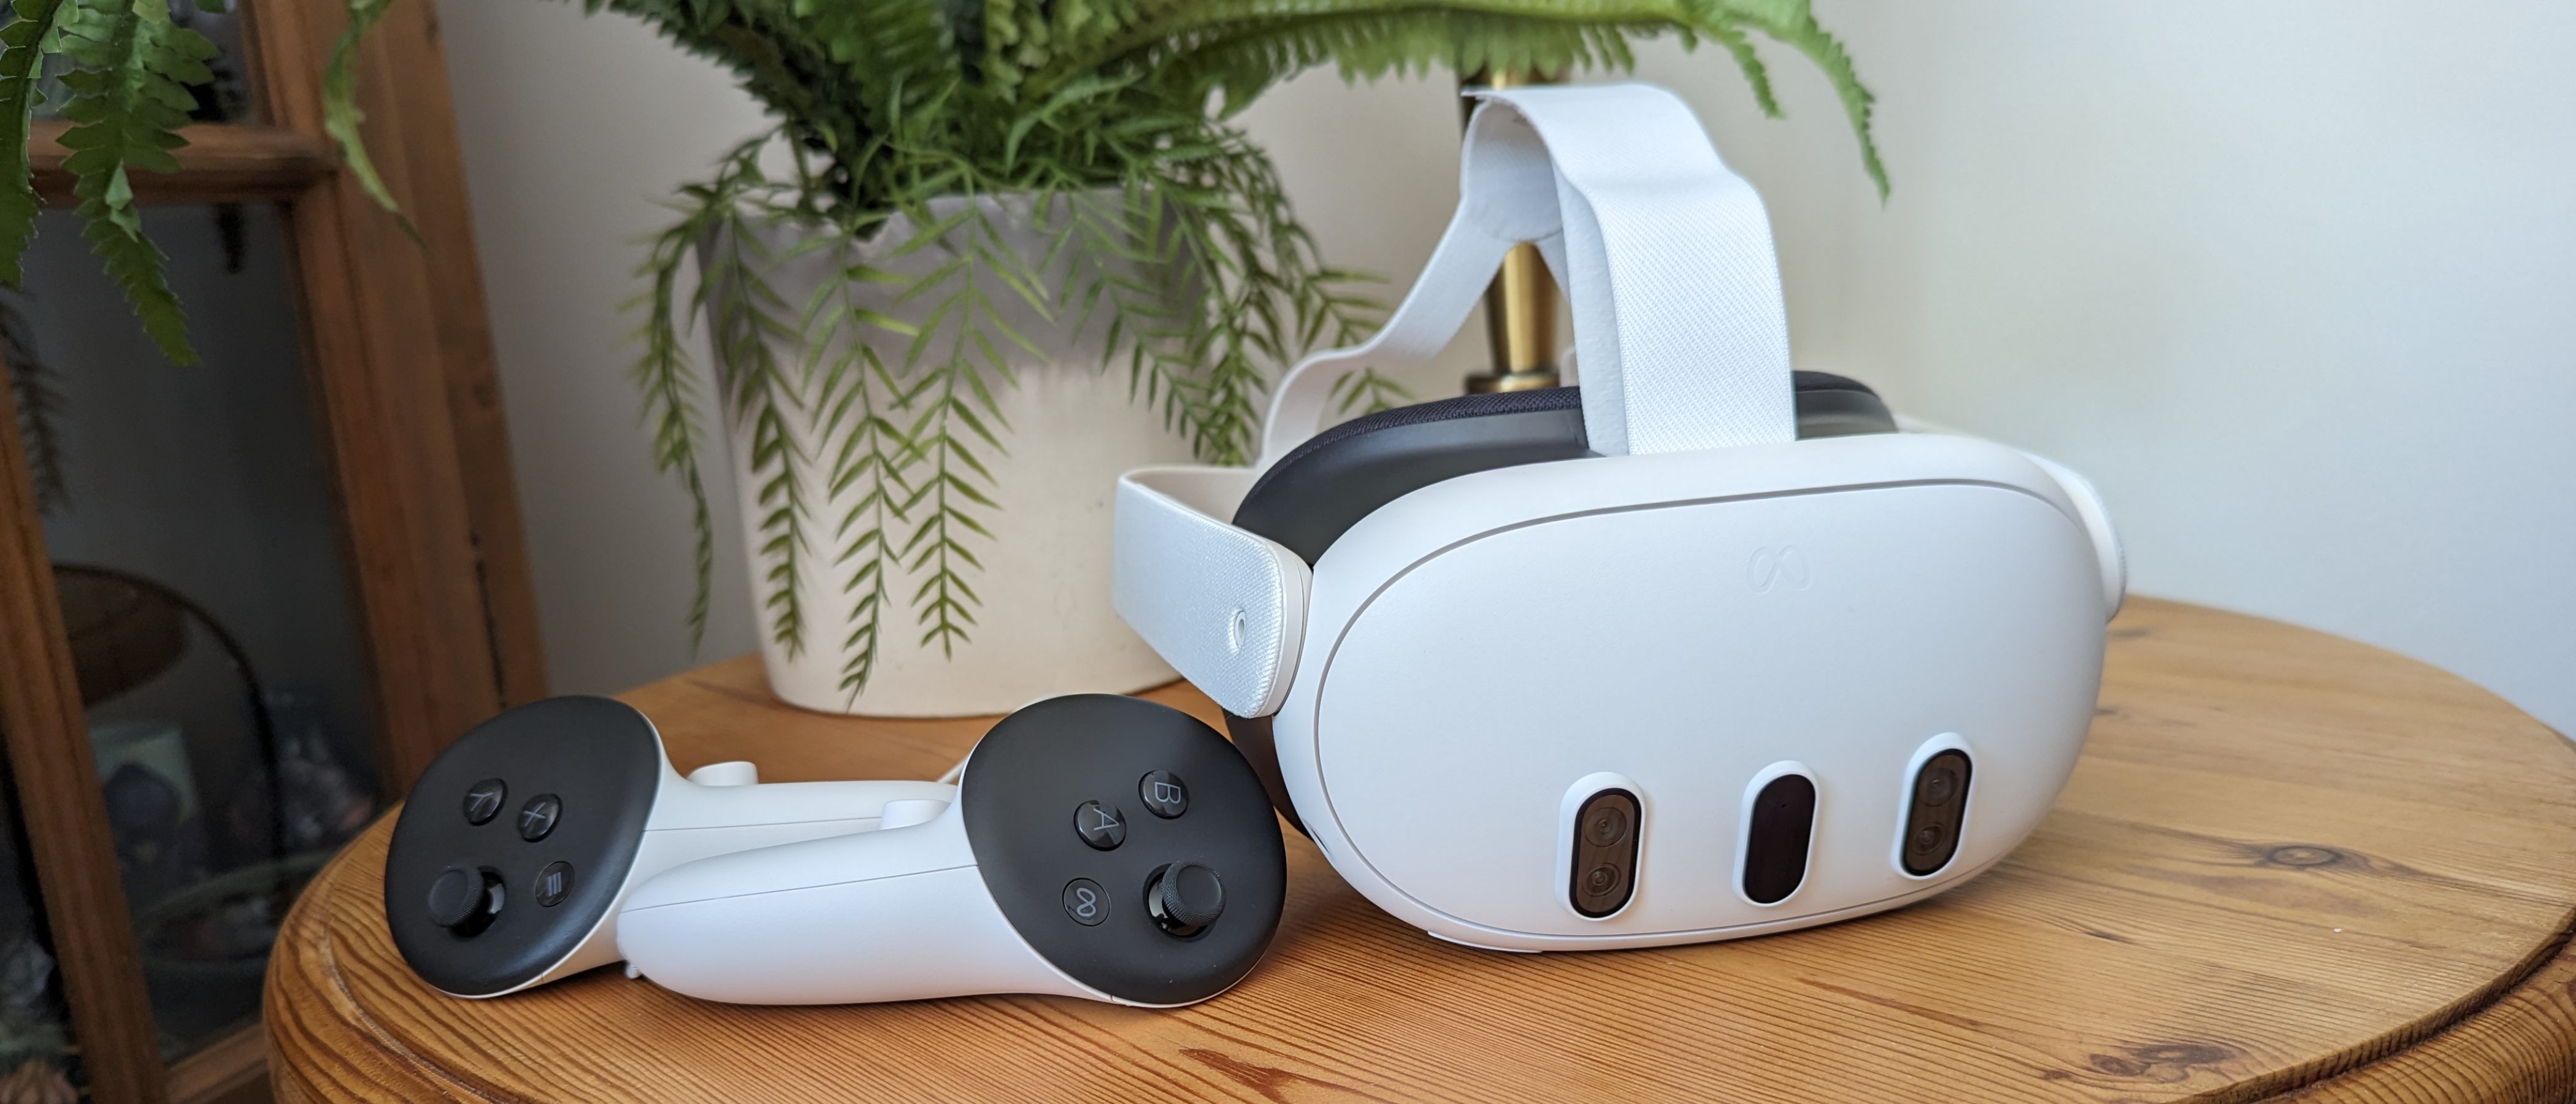 Hands on: The Meta Quest Pro headset delivers pricey VR power